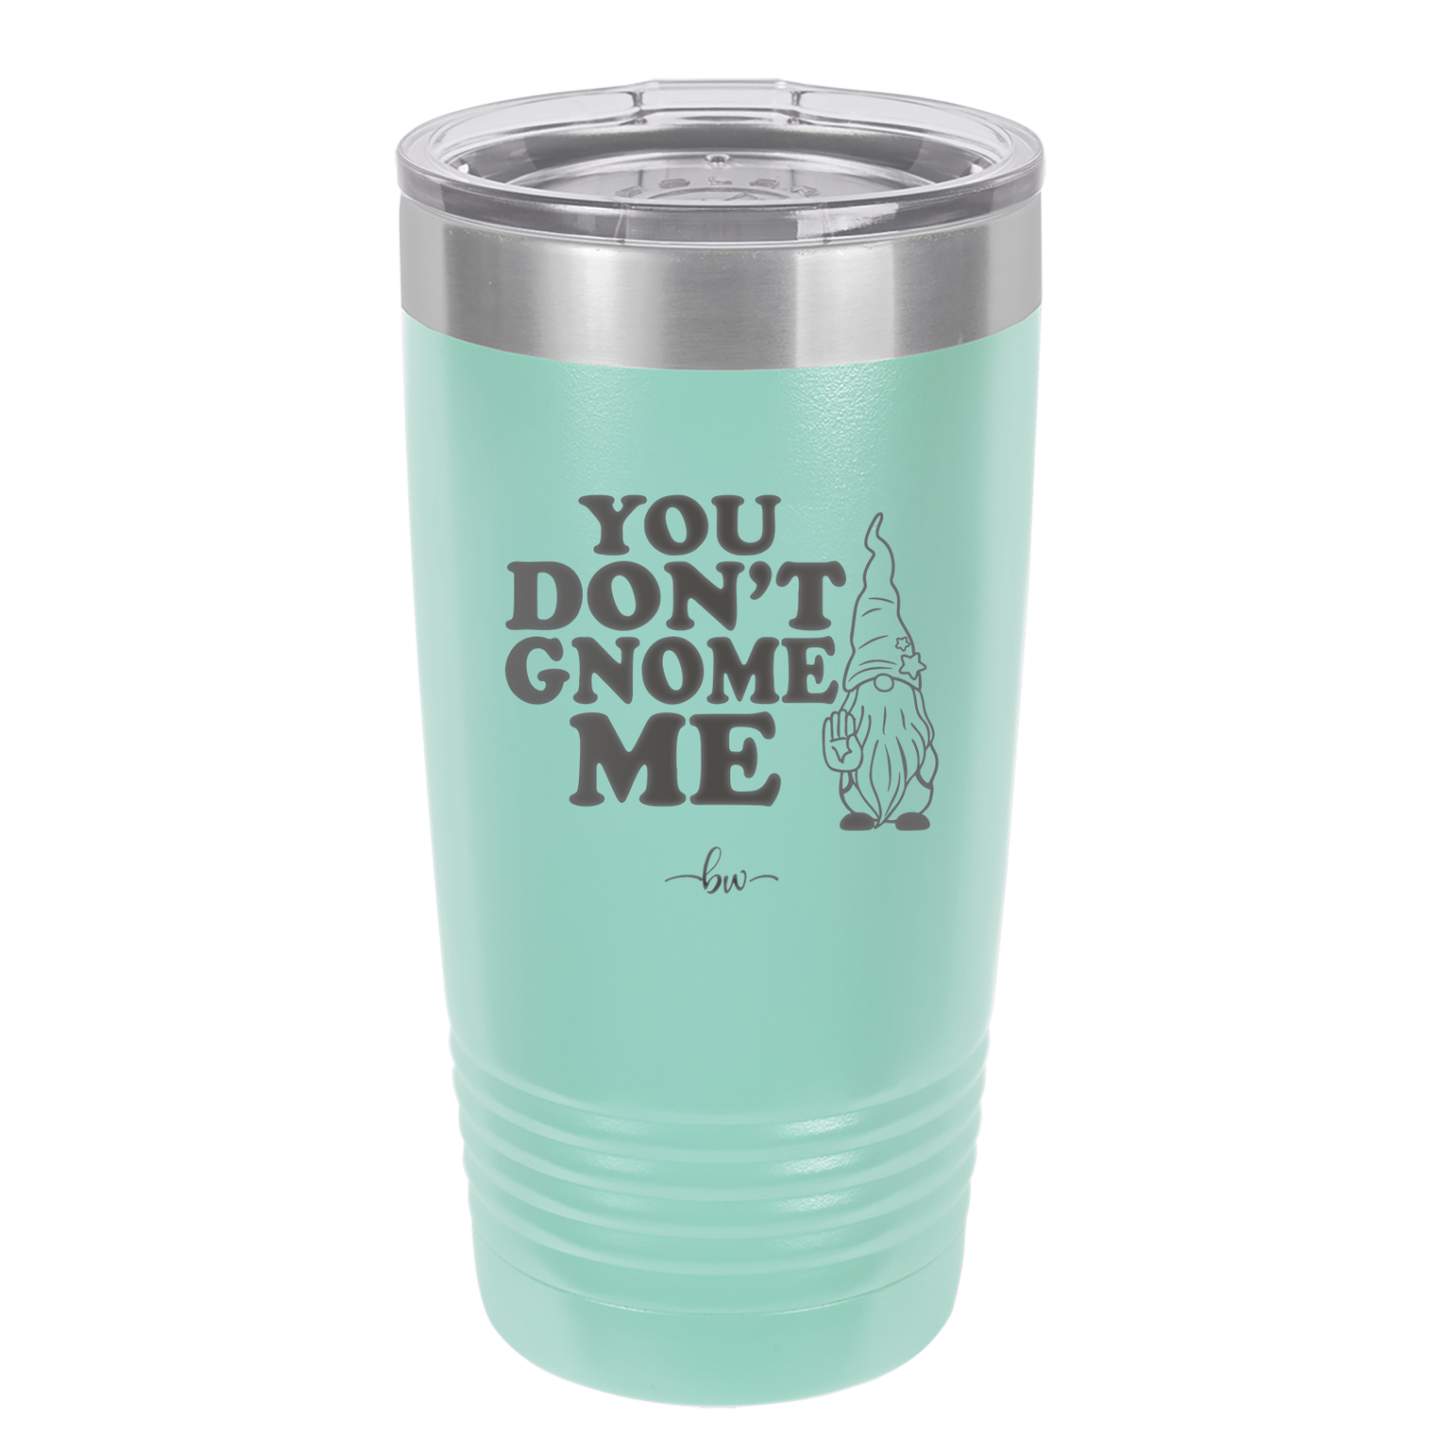 You Don't Gnome Me 1 - Laser Engraved Stainless Steel Drinkware - 2563 -